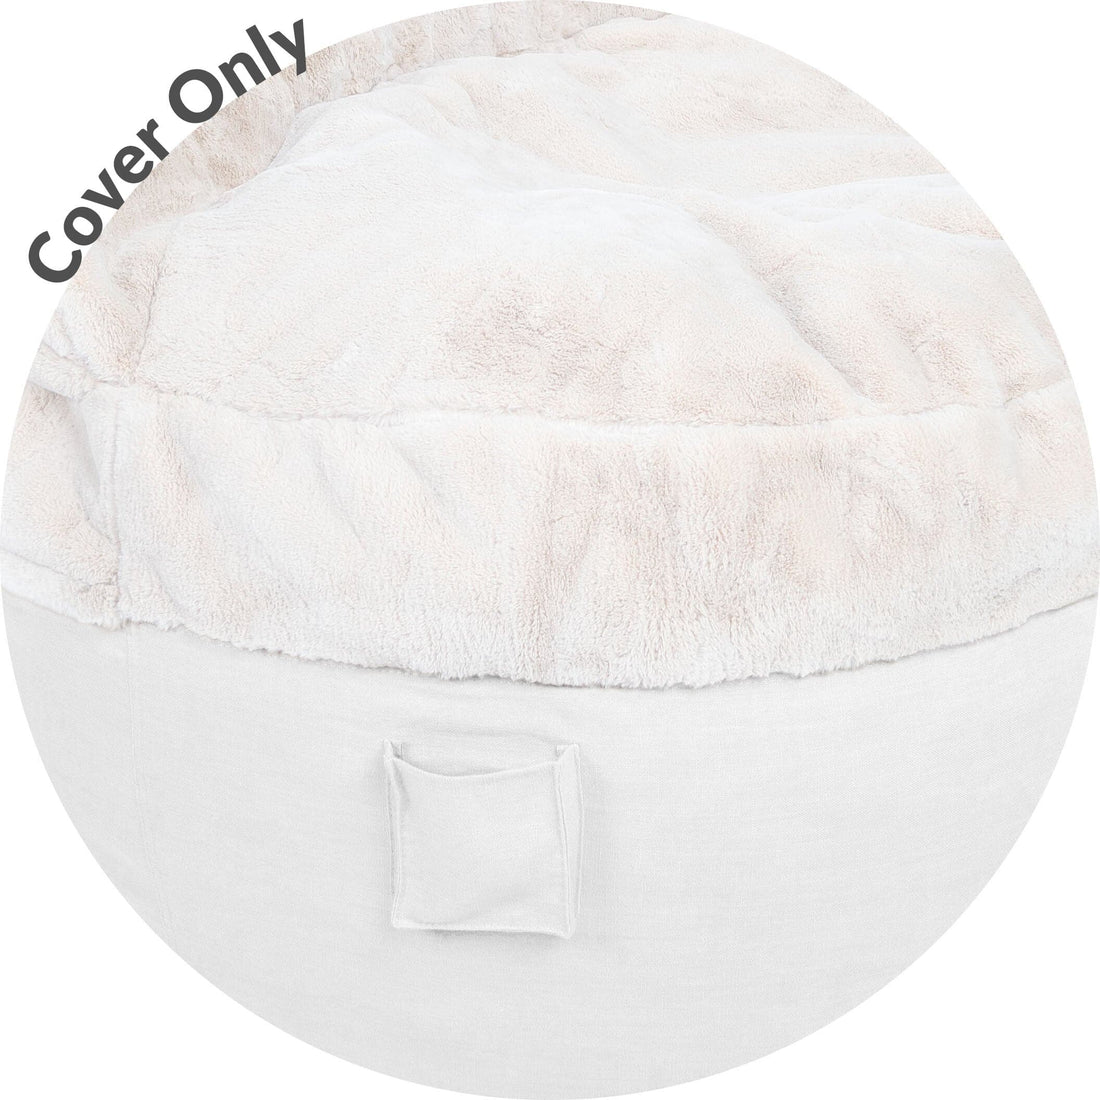 Queen Cover Only - NEST Bunny Fur (Excludes Pillow)